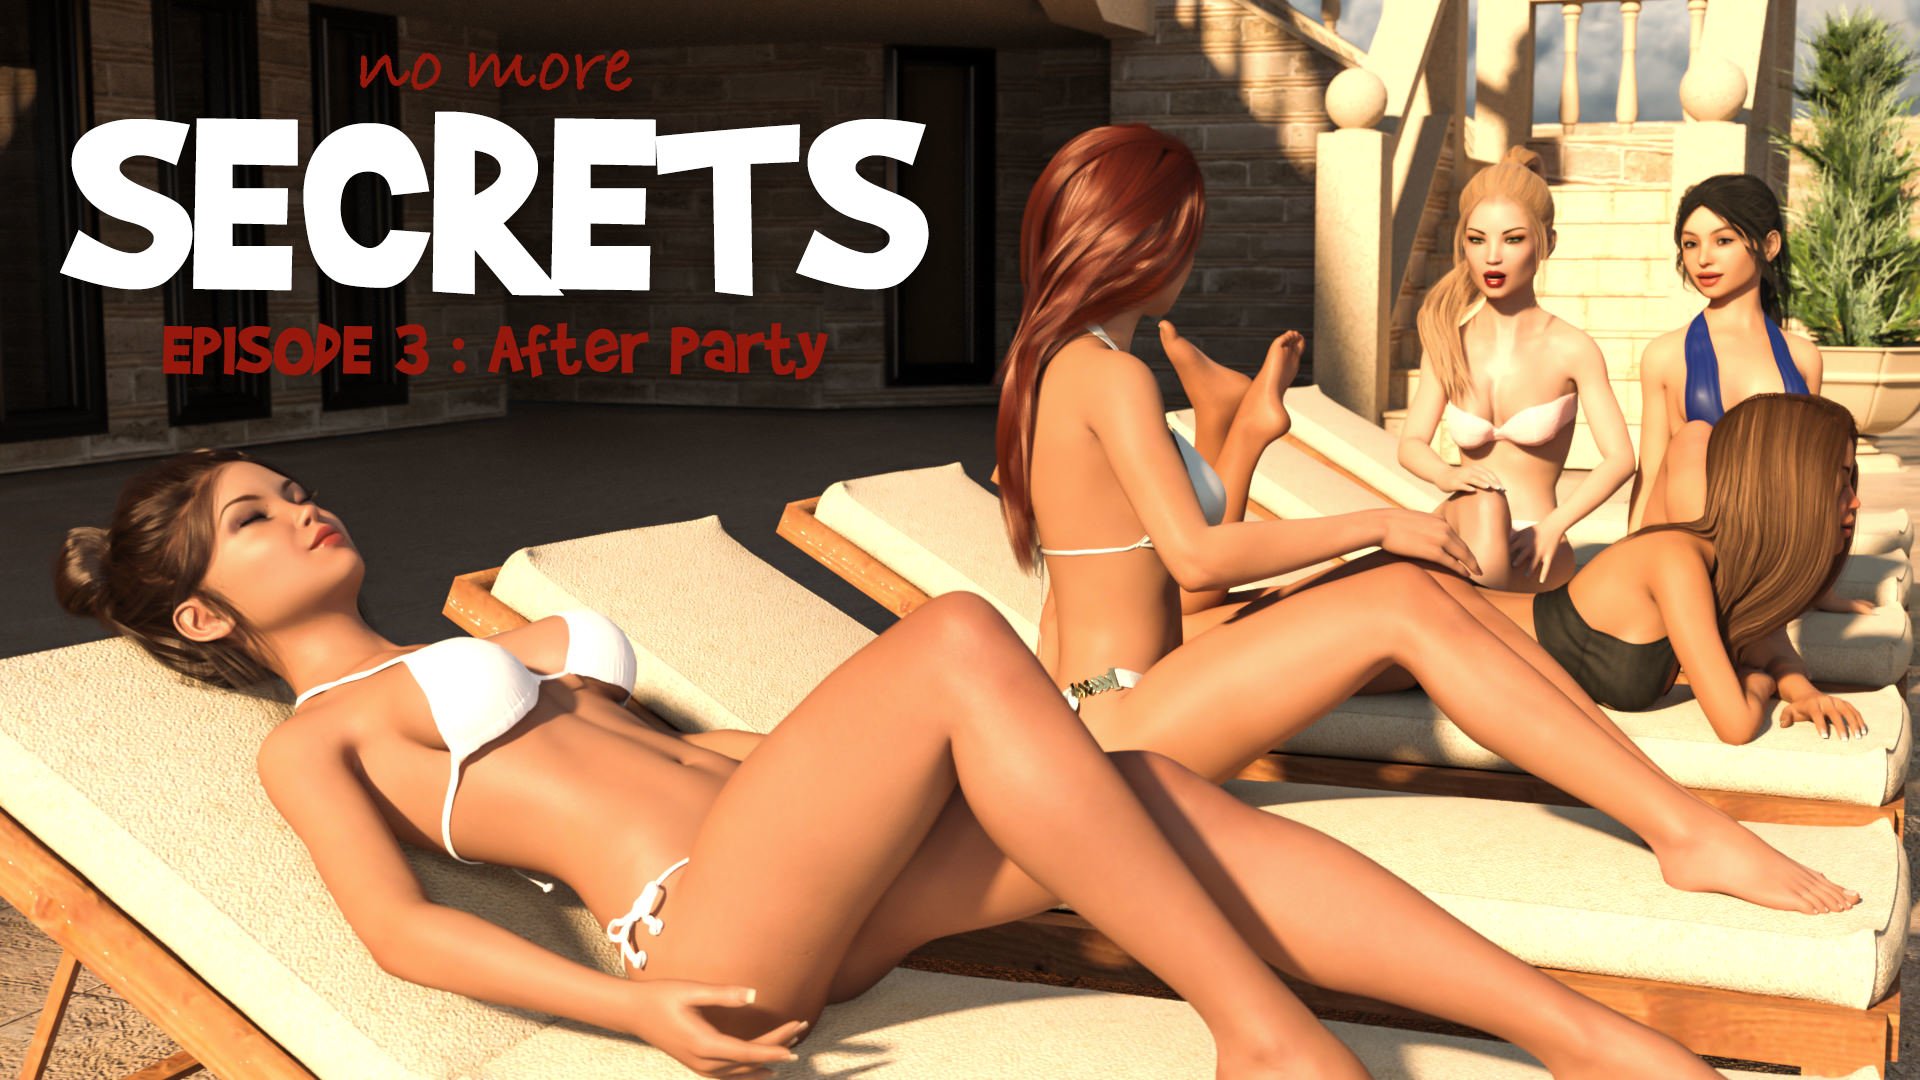 No More Secrets – Version 0.10.4 & Incest Patch - Free patreon family erotic PC game 4